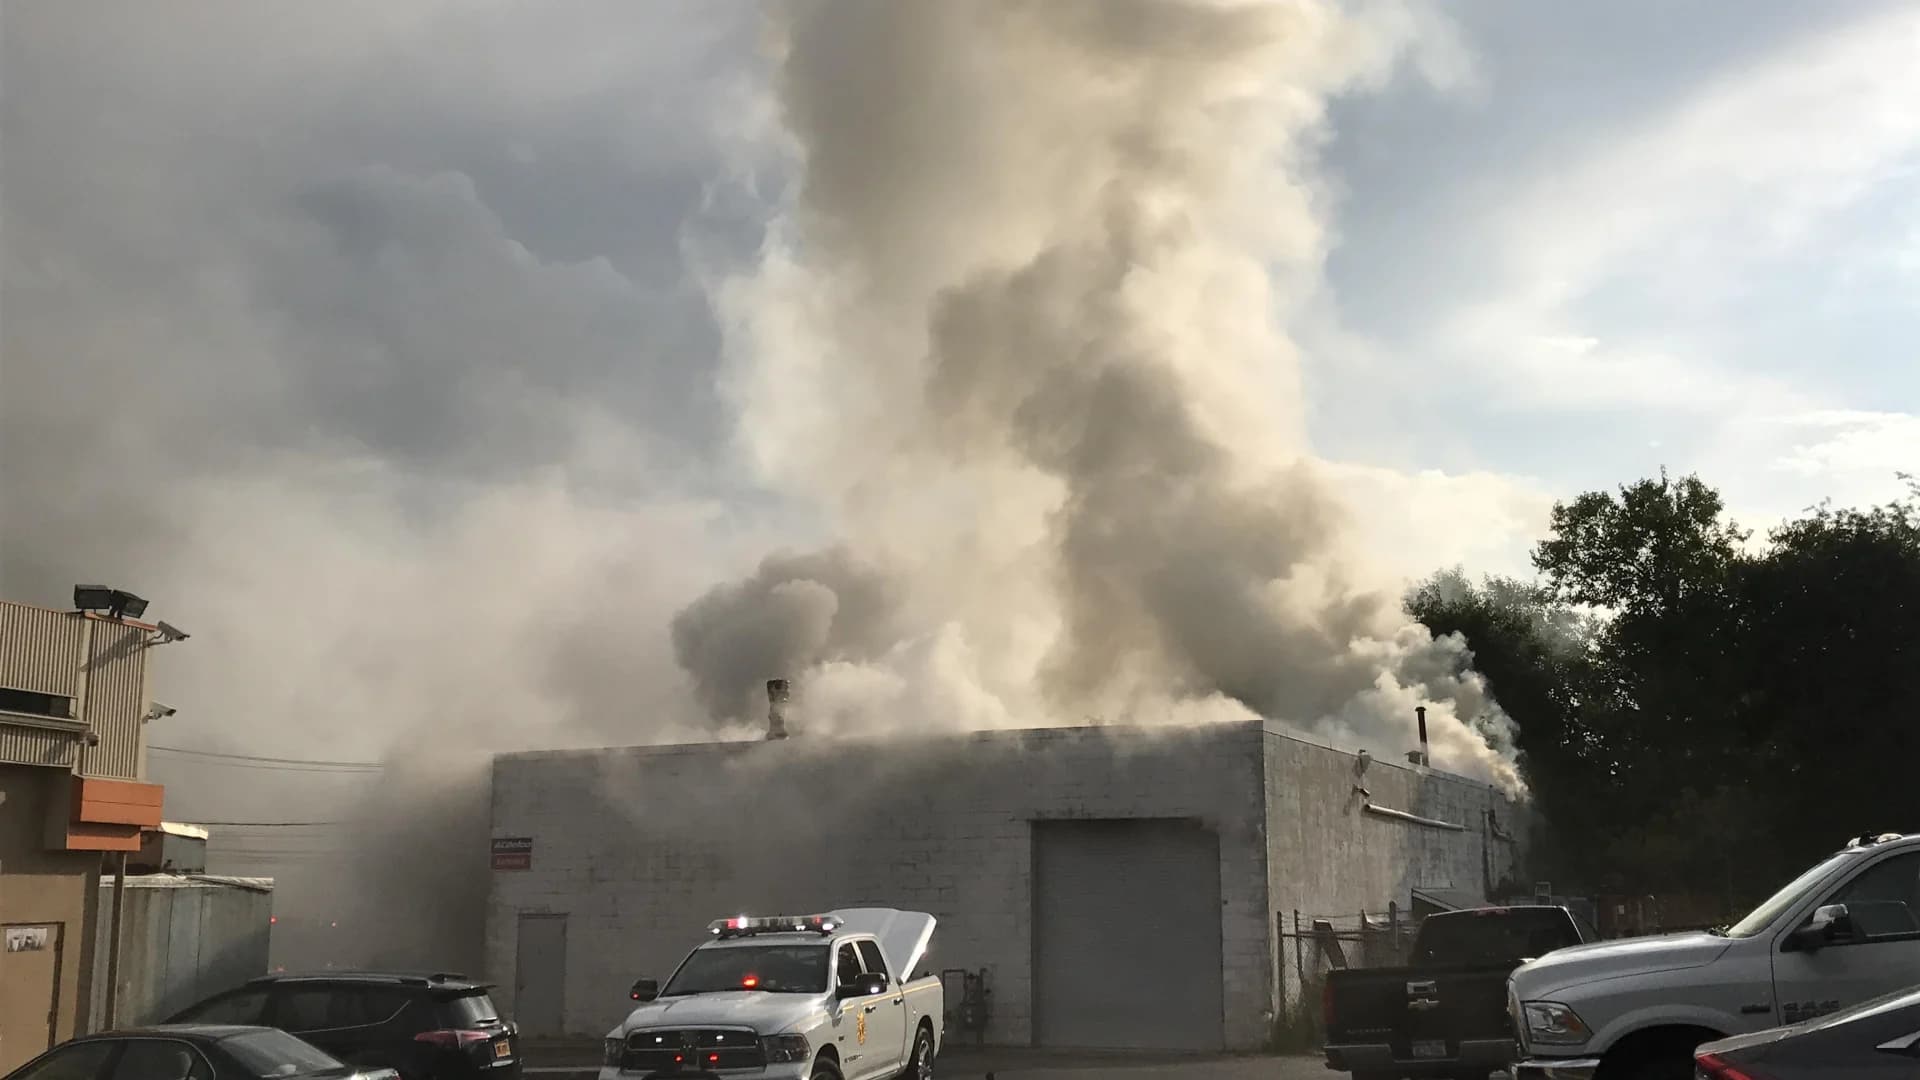 60 firefighters respond to flames at Huntington auto body shop